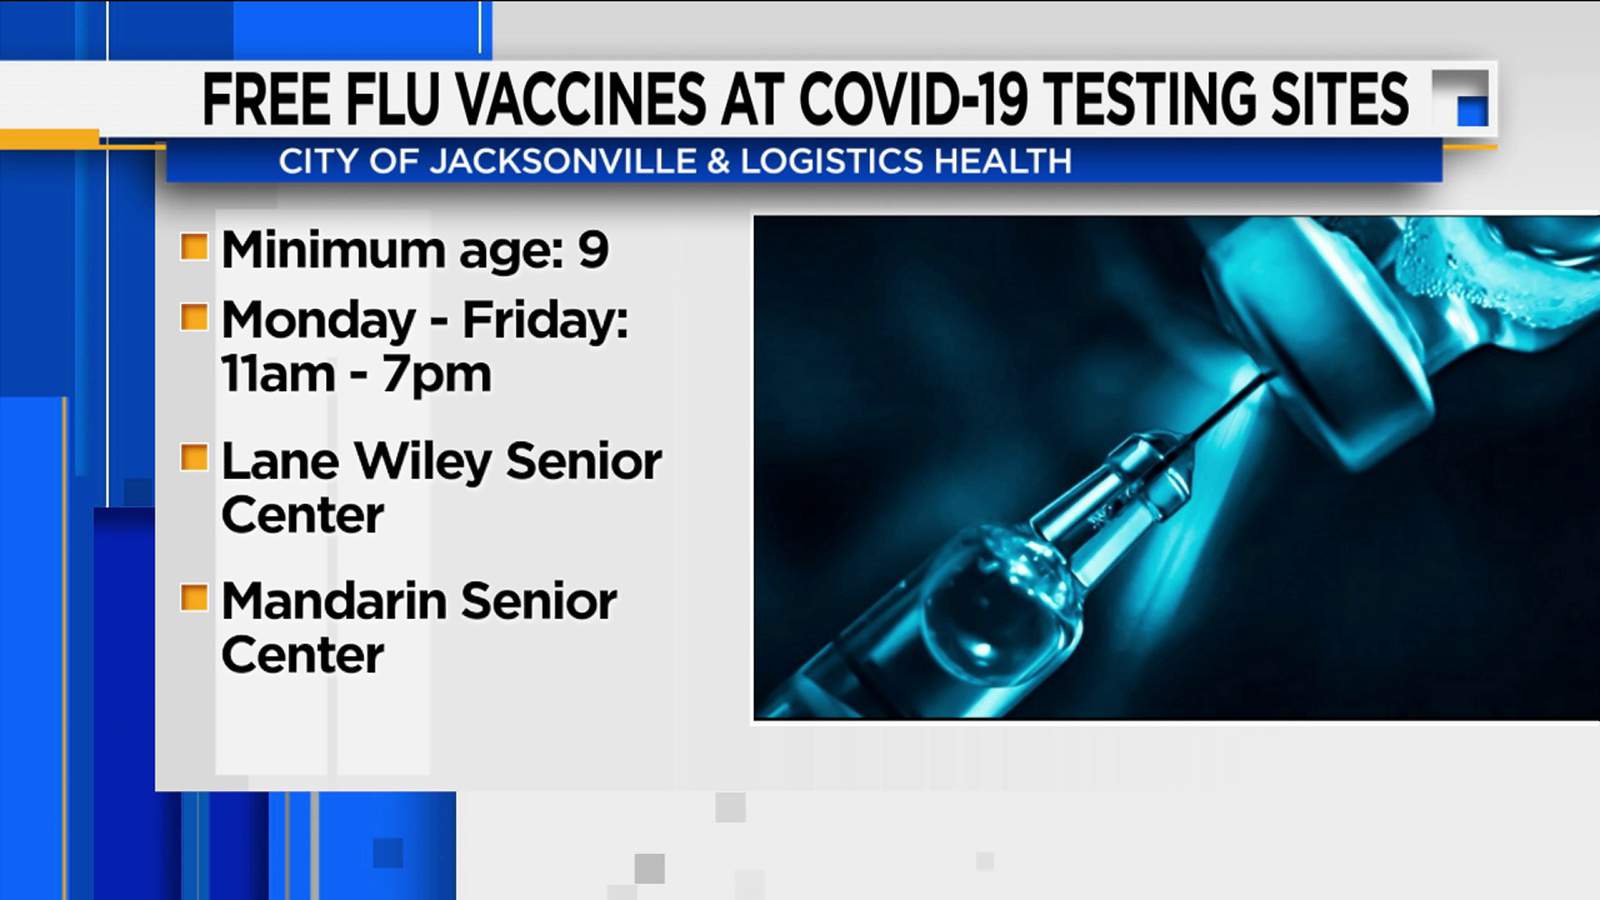 Free flu vaccinations for Jacksonville residents at 2 COVID-19 testing sites